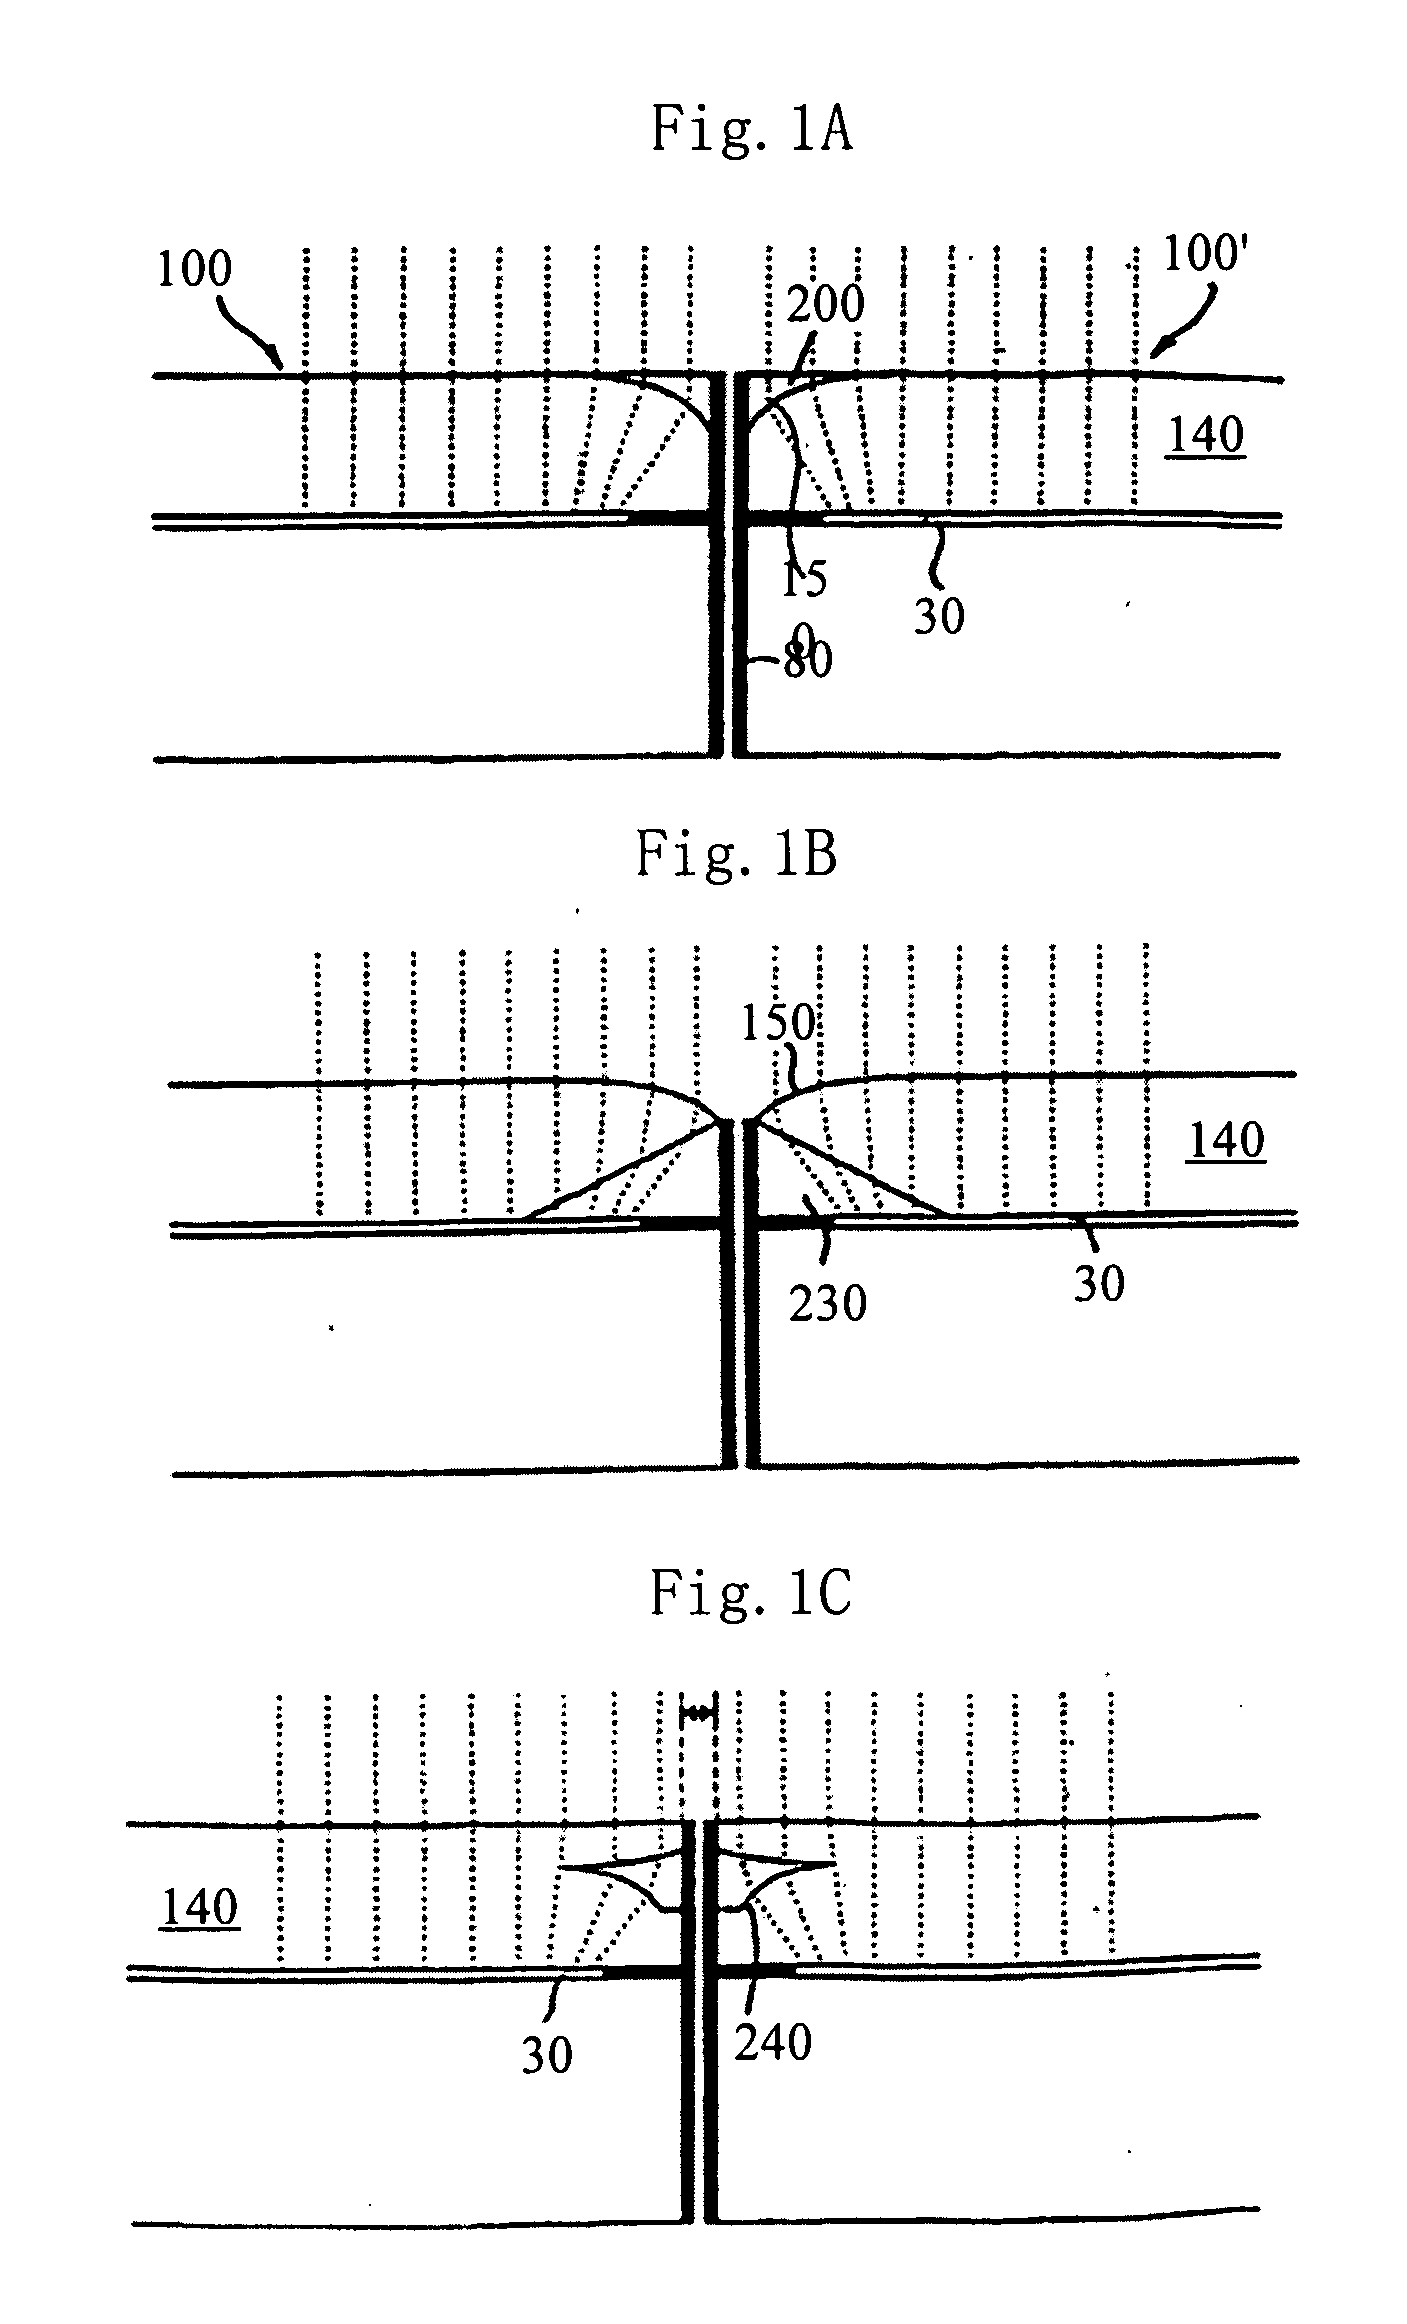 Method and Apparatus for Eliminating Seam Between Adjoined Screens